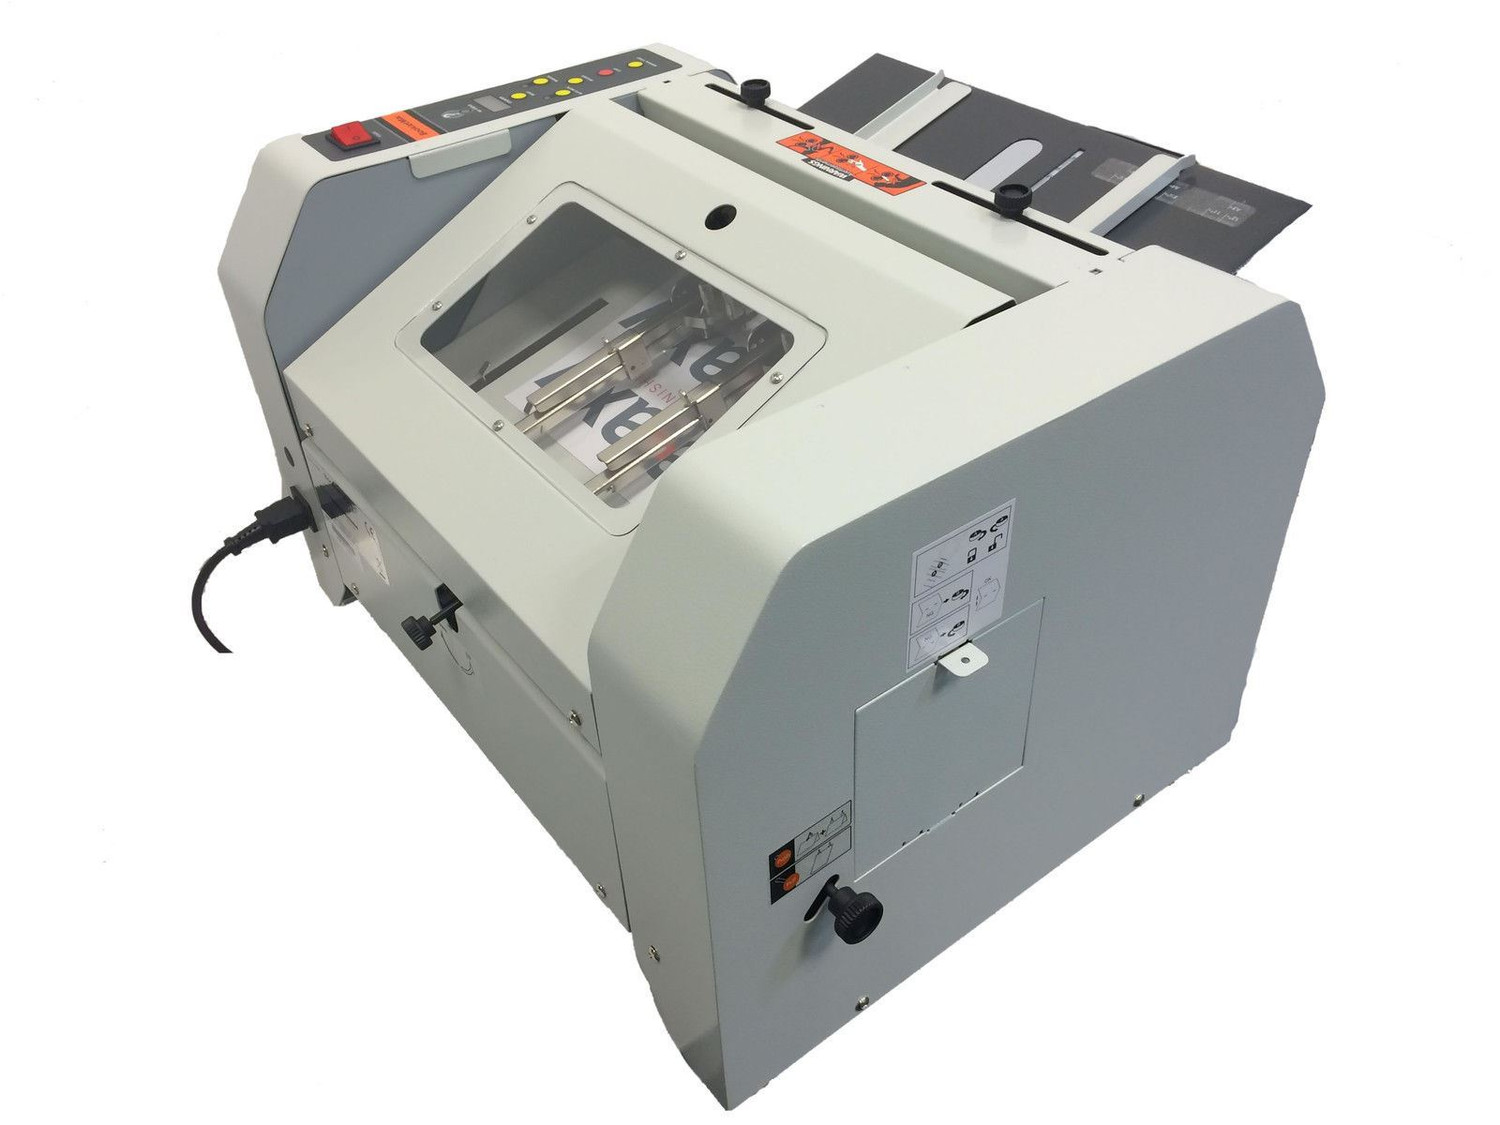 Galaxy Perforate & Go Hand Operated Paper & Card Perforating Machine -  Postroom-online Ltd